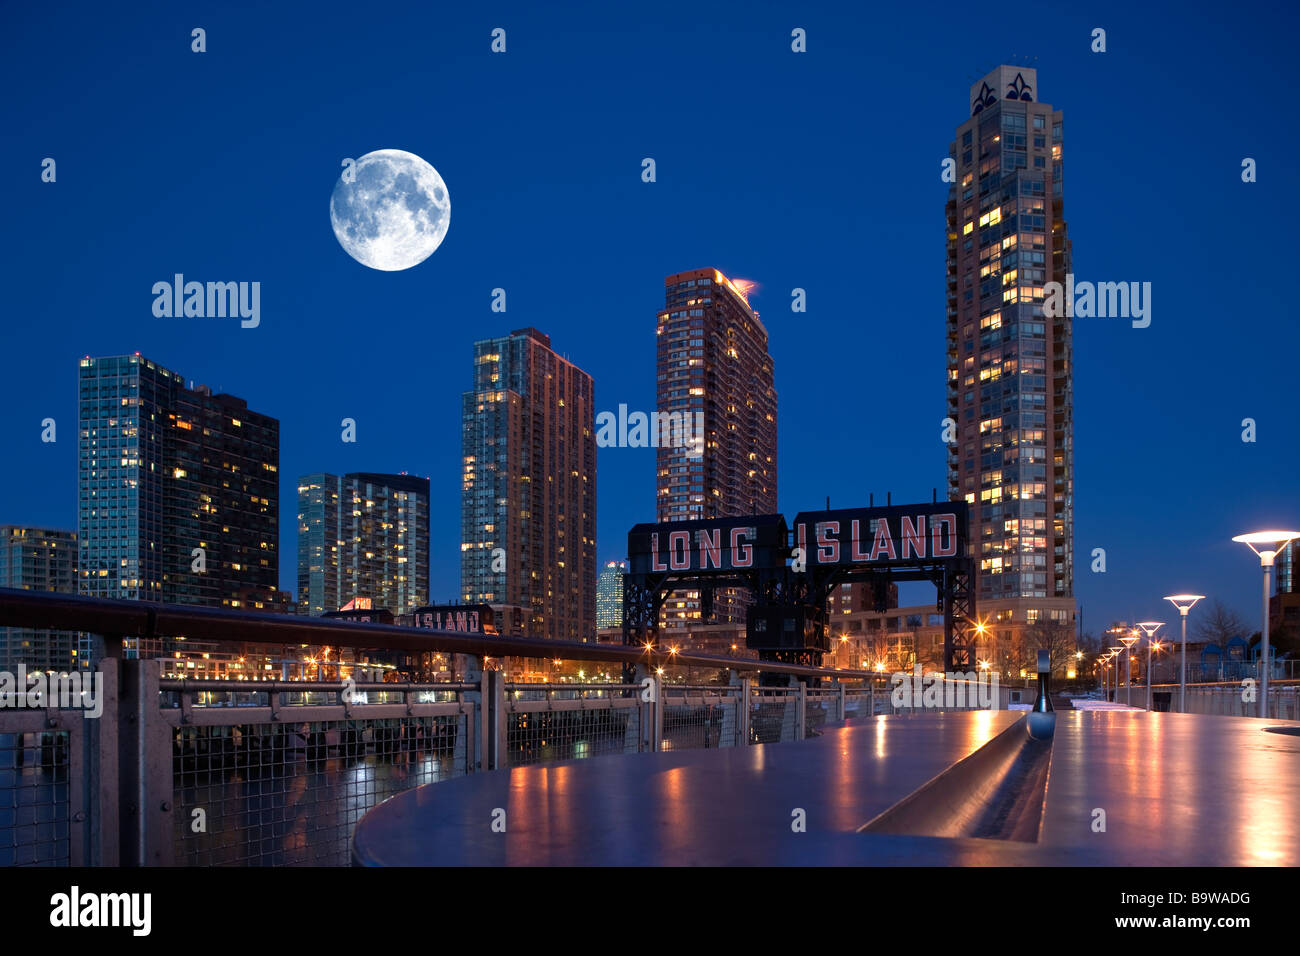 TALL APARTMENT BUILDINGS GANTRY PLAZA STATE PARK LONG ISLAND CITY  WATERFRONT QUEENS NEW YORK CITY USA Stock Photo